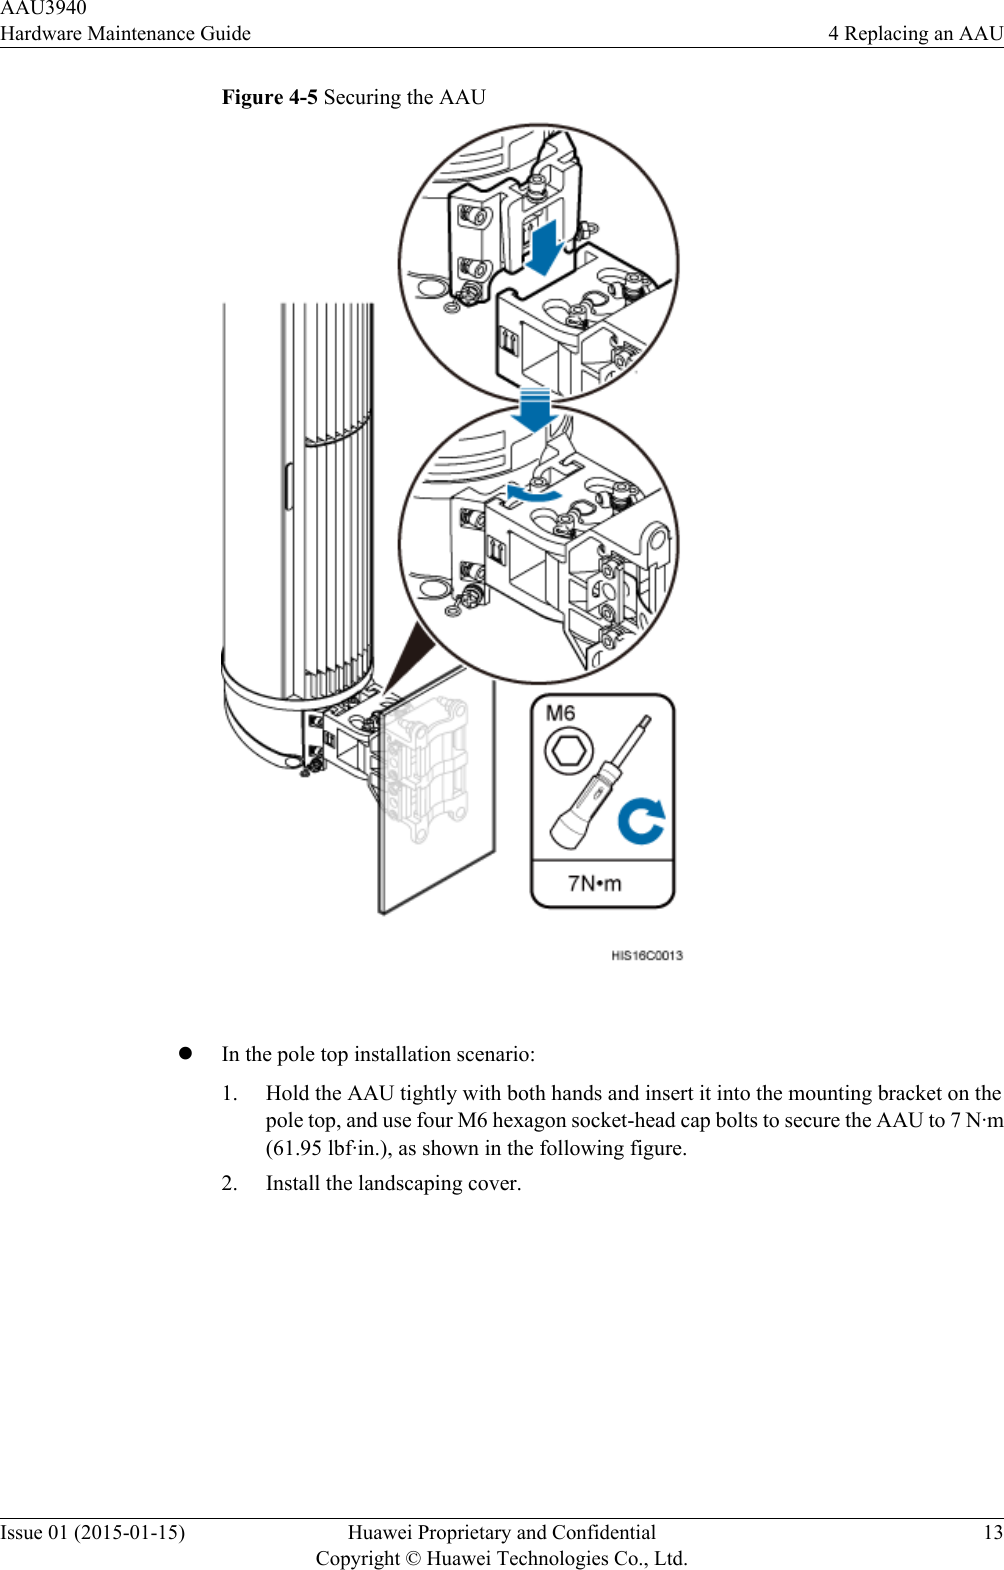 Figure 4-5 Securing the AAU lIn the pole top installation scenario:1. Hold the AAU tightly with both hands and insert it into the mounting bracket on thepole top, and use four M6 hexagon socket-head cap bolts to secure the AAU to 7 N·m(61.95 lbf·in.), as shown in the following figure.2. Install the landscaping cover.AAU3940Hardware Maintenance Guide 4 Replacing an AAUIssue 01 (2015-01-15) Huawei Proprietary and ConfidentialCopyright © Huawei Technologies Co., Ltd.13